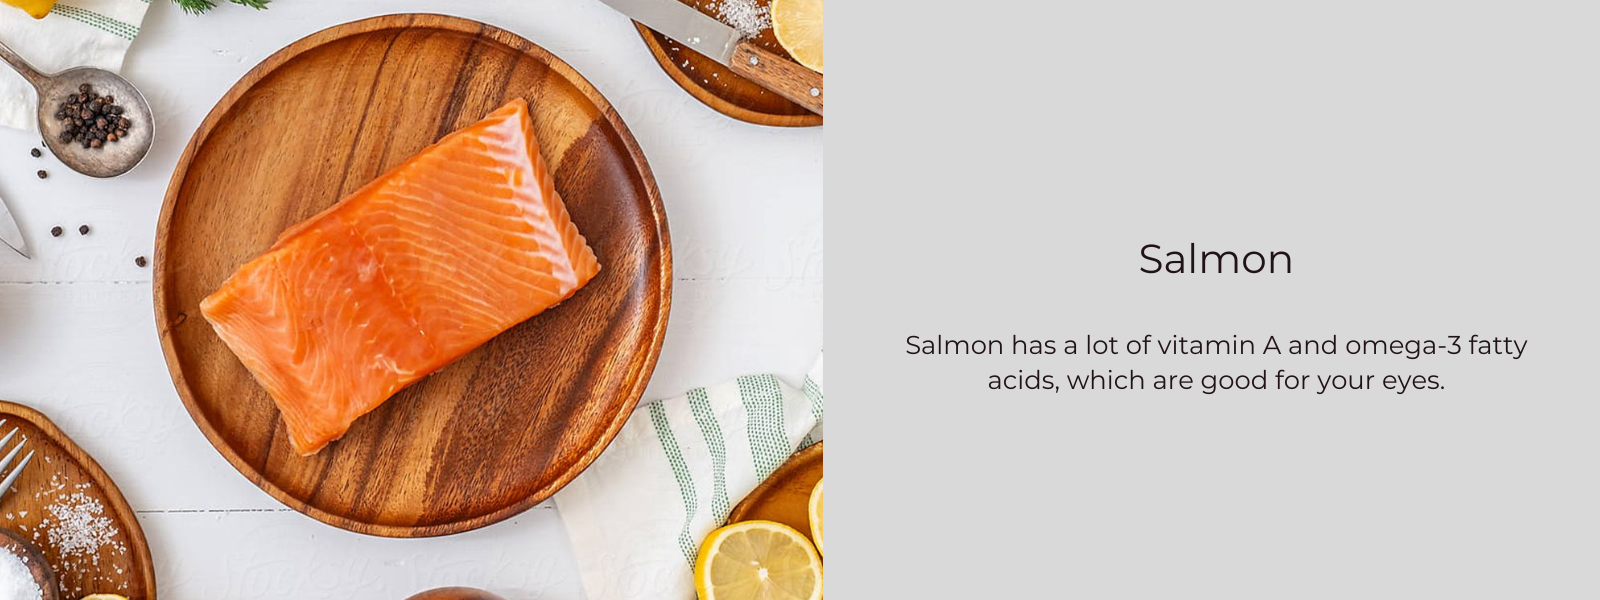 Salmon – Health Benefits, Uses and Important Facts